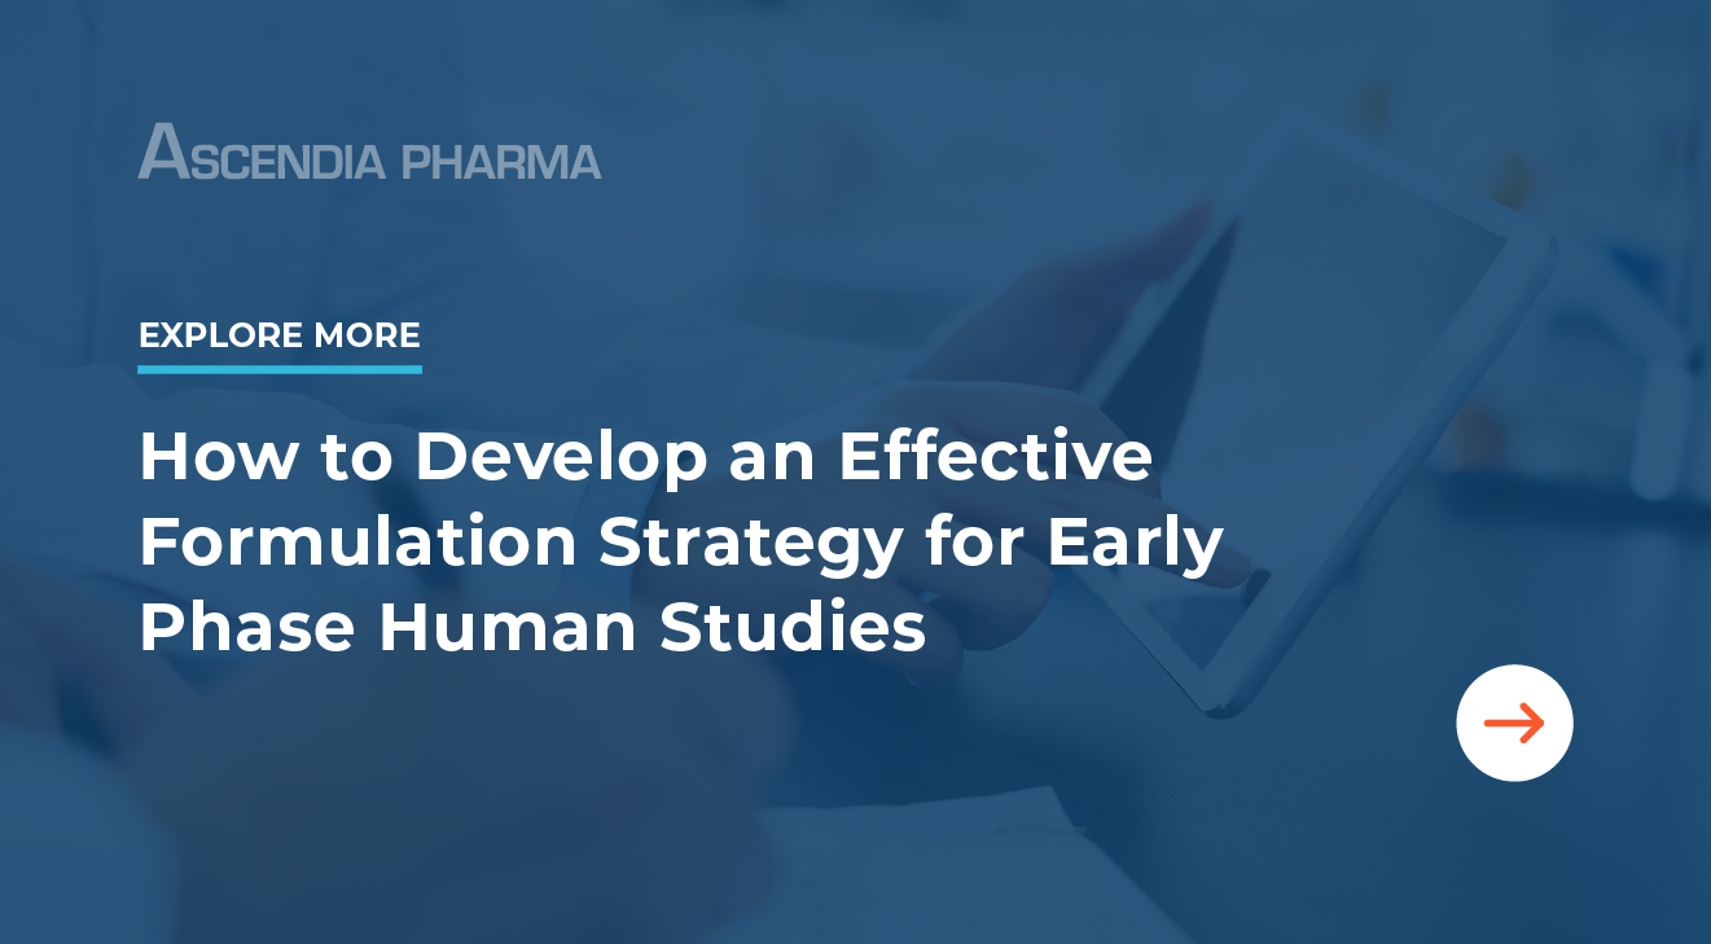 How to Develop an Effective Formualtion Strategy for Early Phase Human Studies